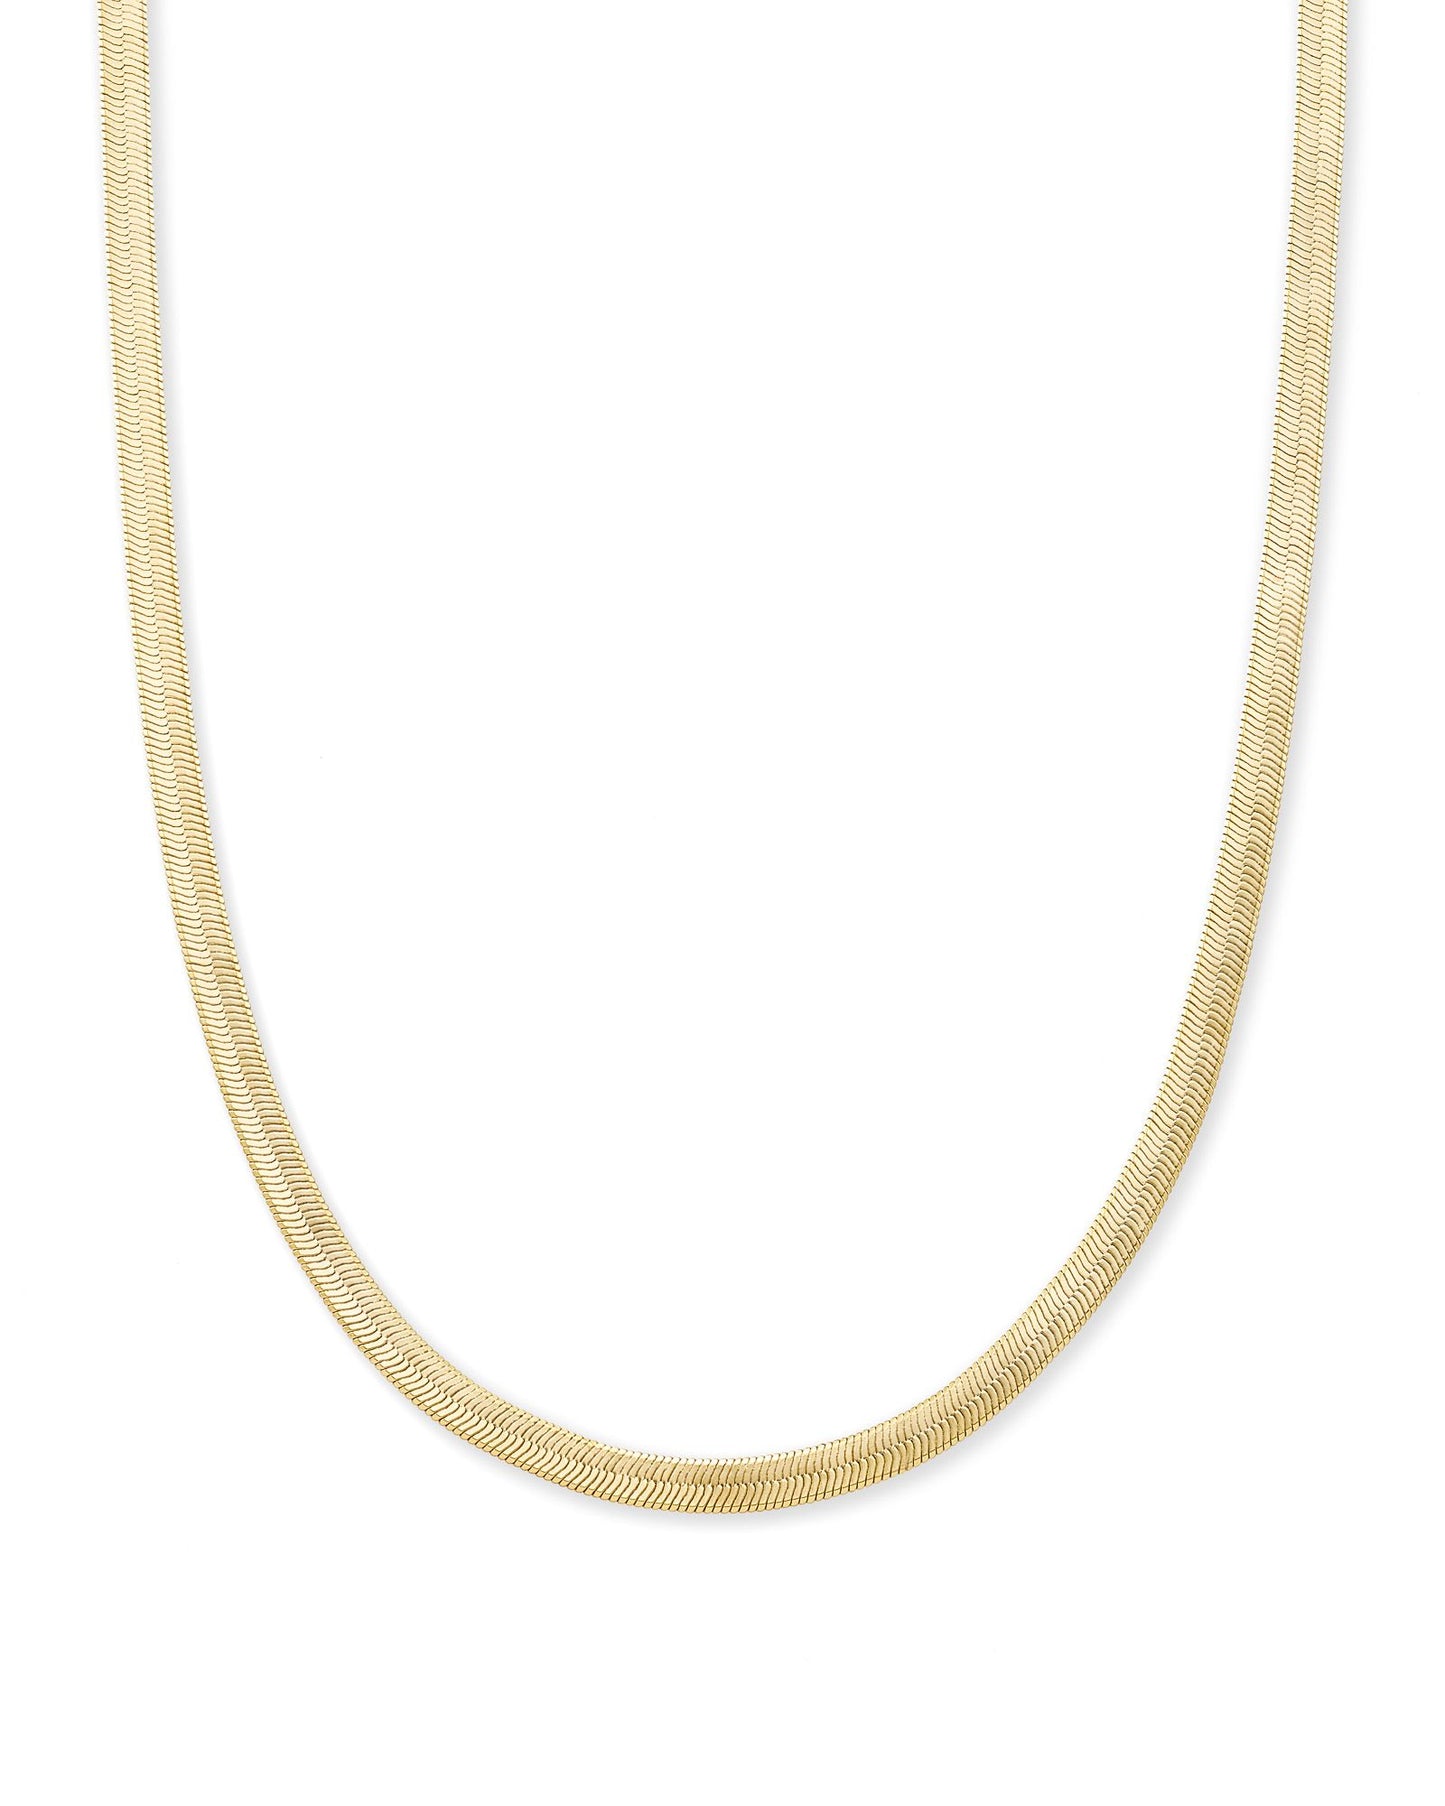 Kendra Scott Kassie Chain Necklace - Gold-Necklaces-Kendra Scott-KS, N1717GLD-The Twisted Chandelier